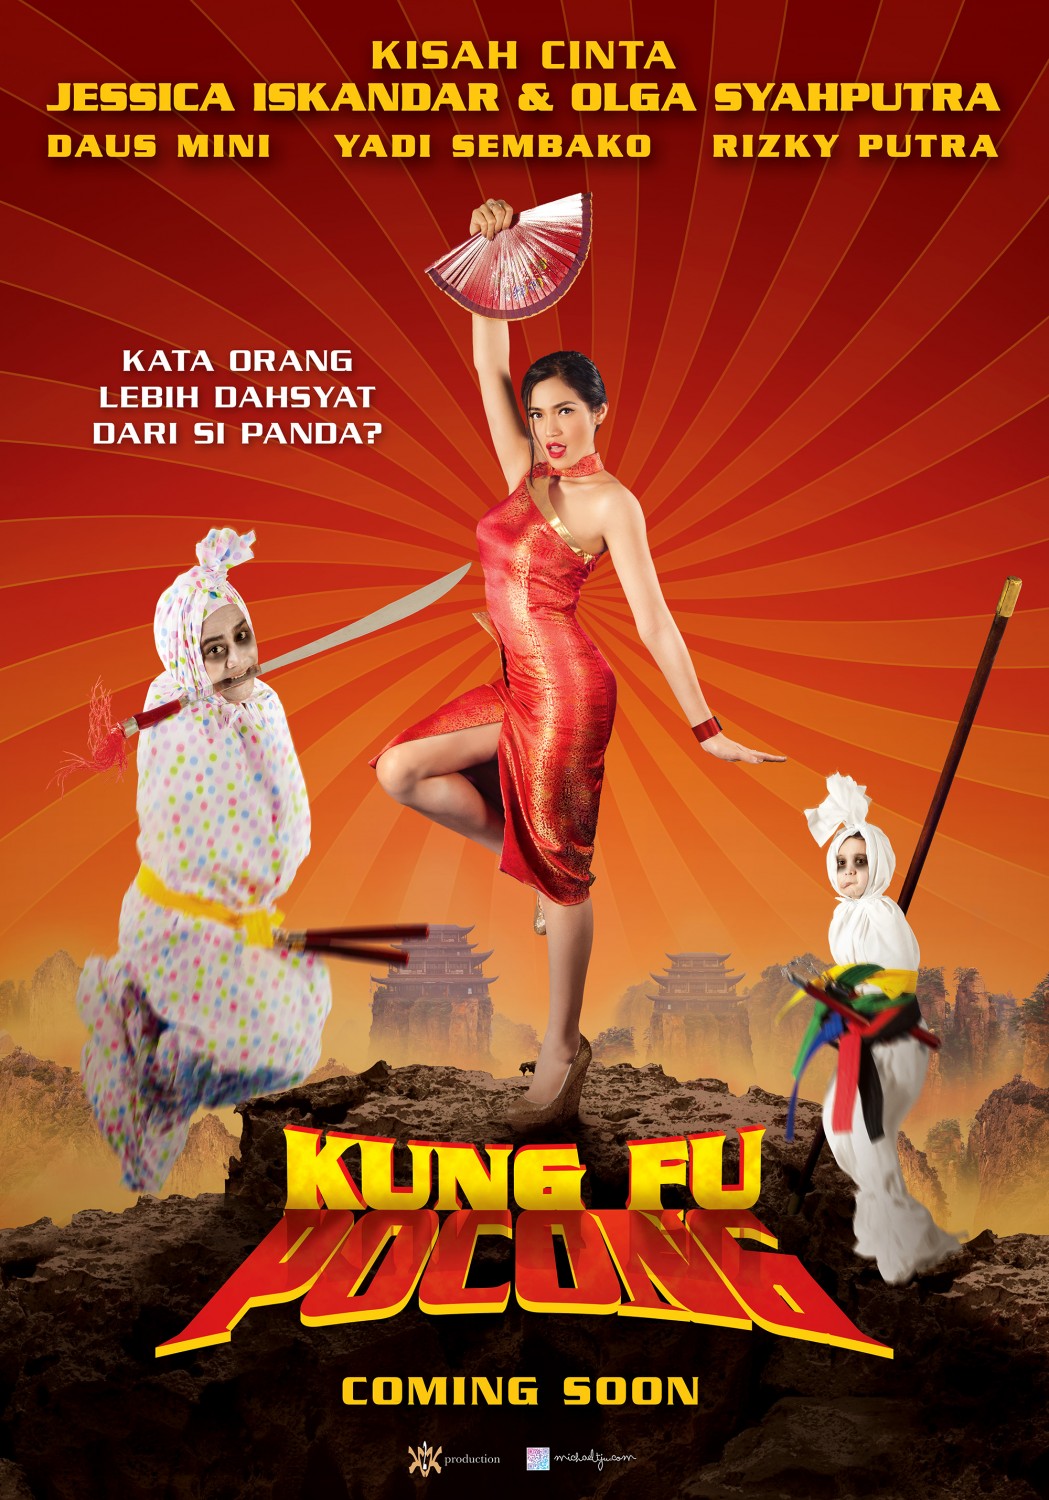 Extra Large Movie Poster Image for Kung fu pocong perawan 